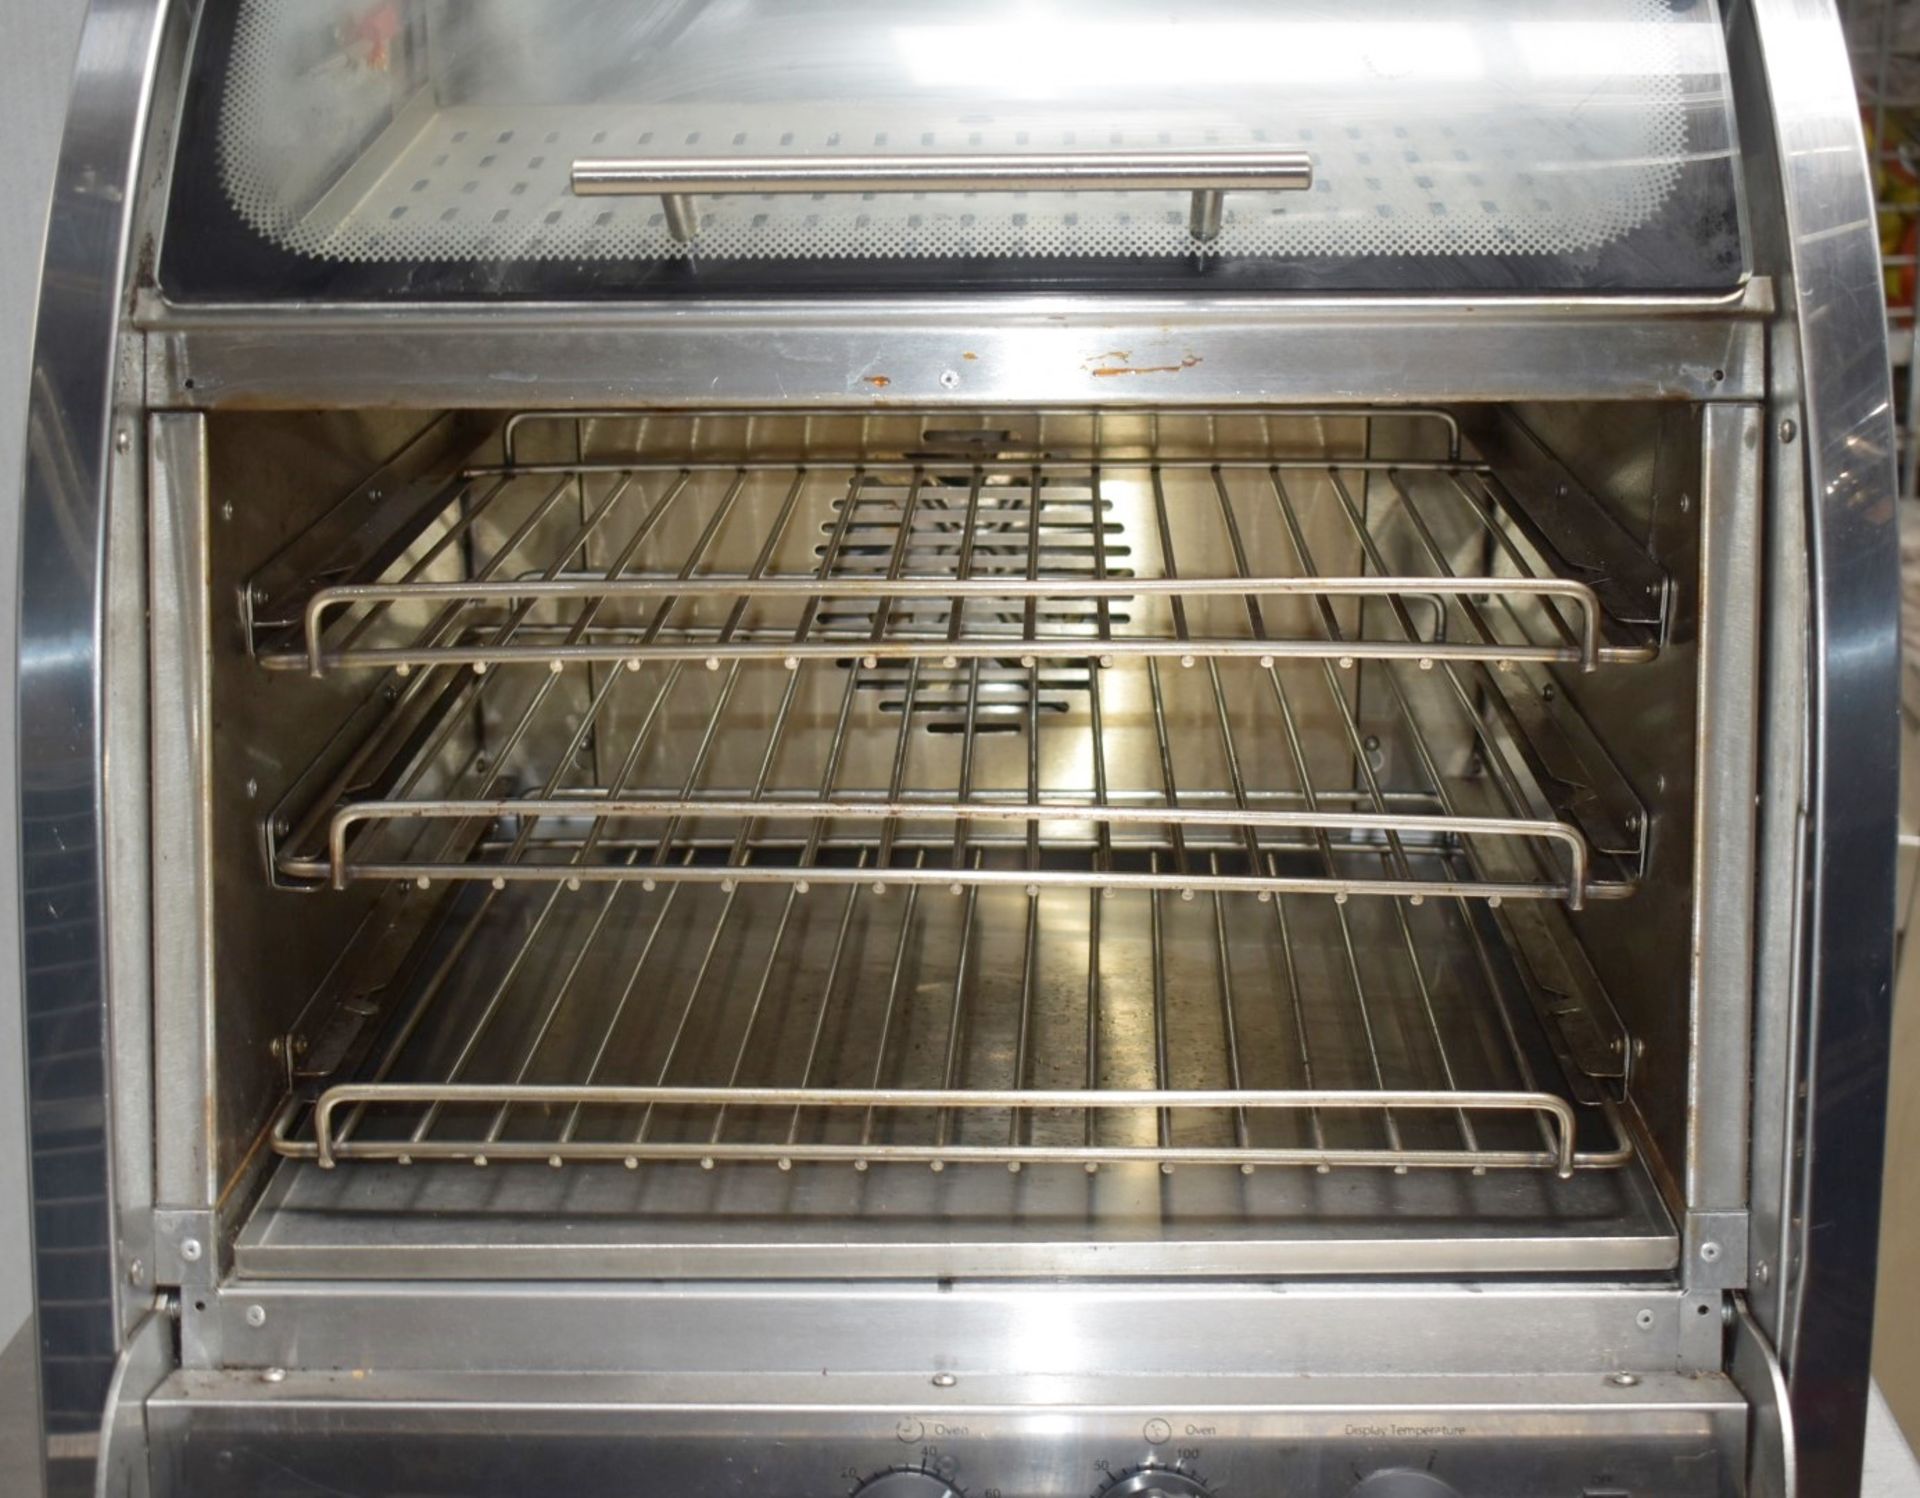 1 x Countertop Oven With Food Warmer Display - Dimensions: H63 x W55 x D56 cms - Recently Removed - Image 3 of 14